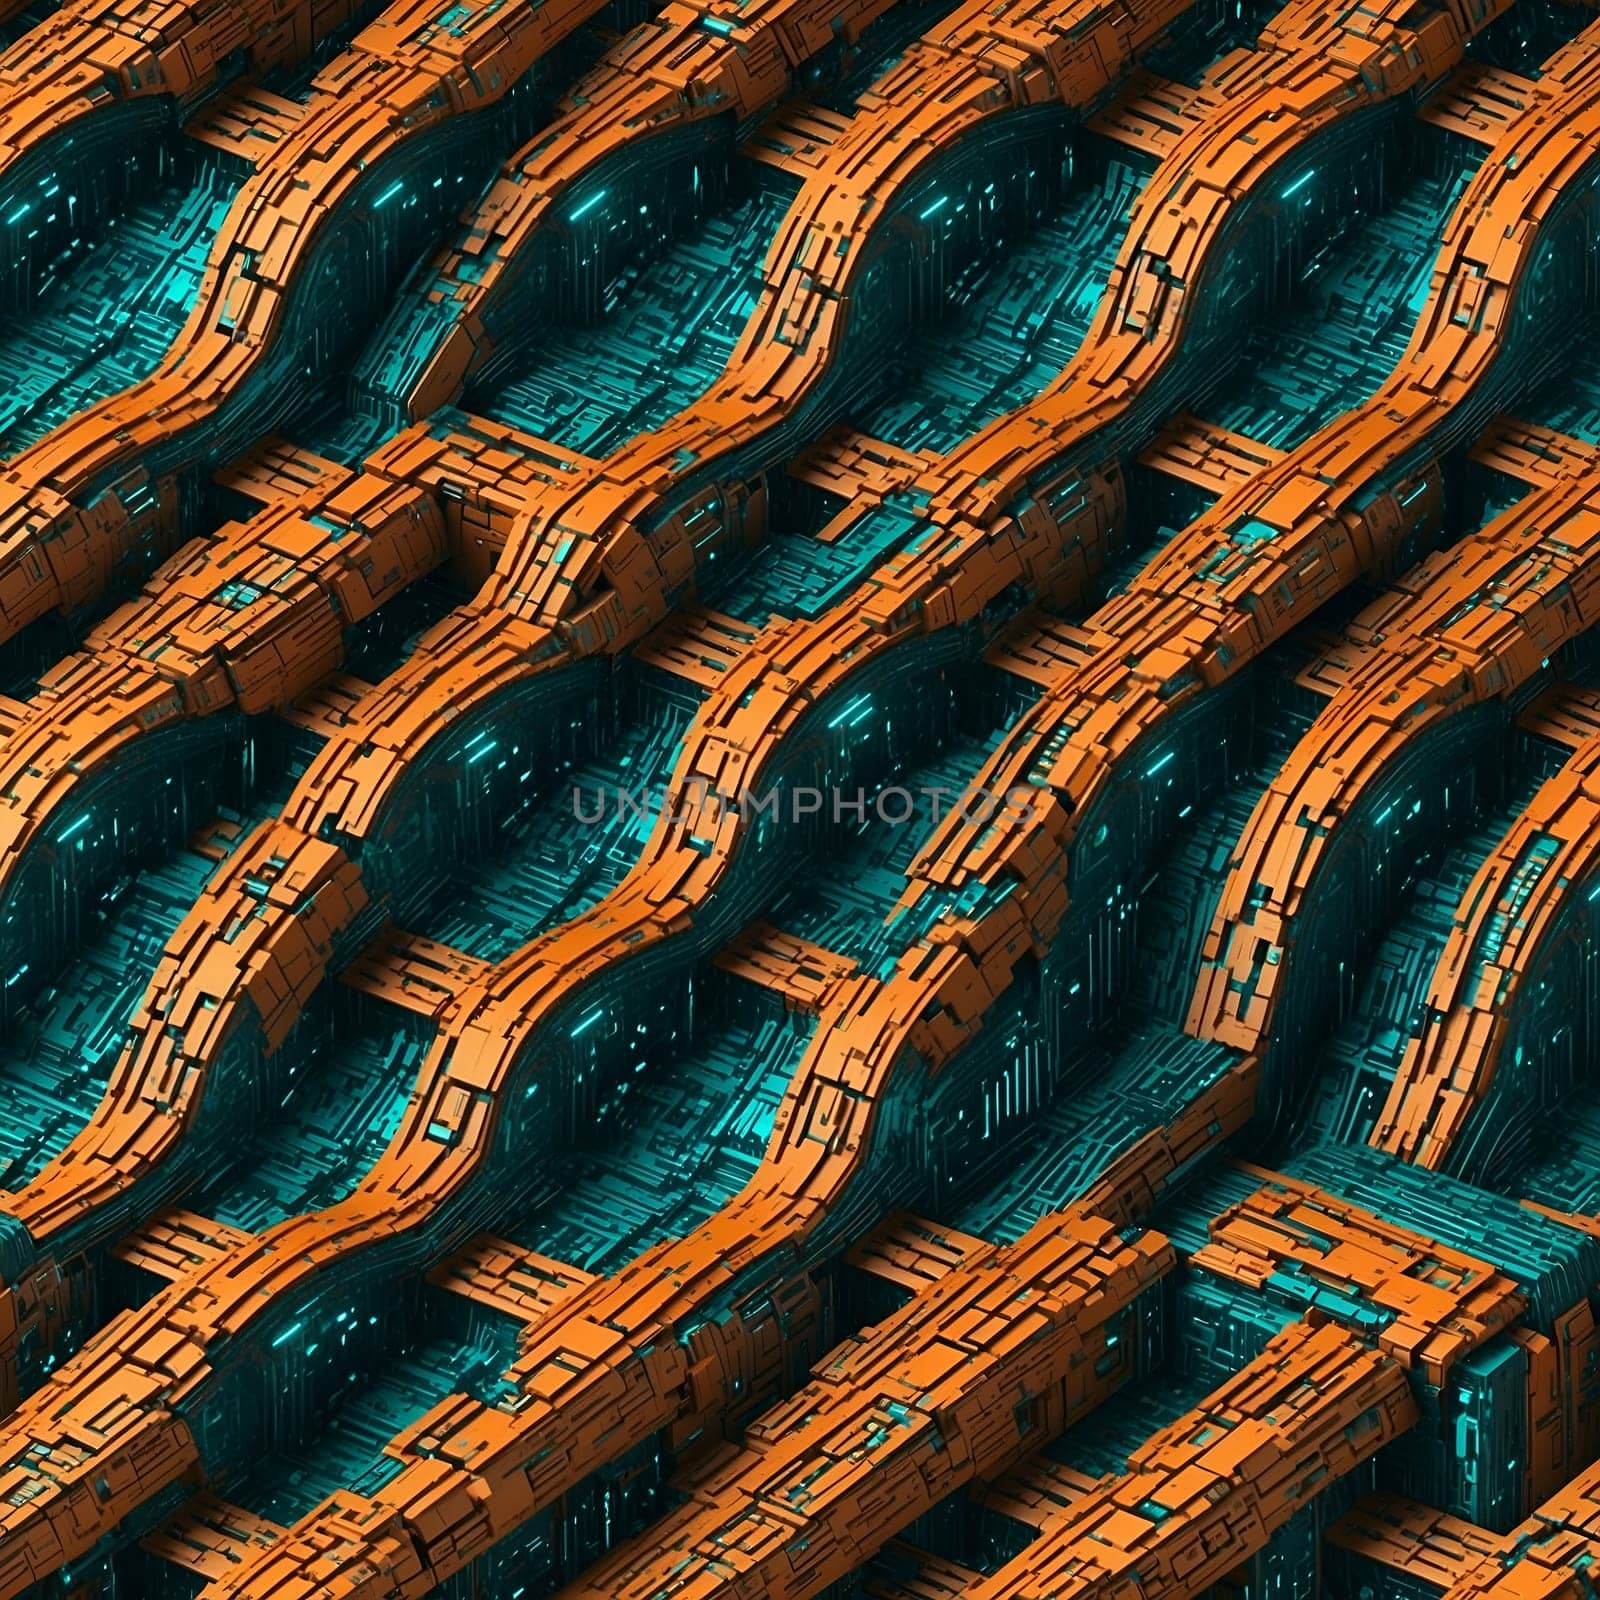 A seamless pattern featuring a multitude of orange and blue boats sailing on the water.